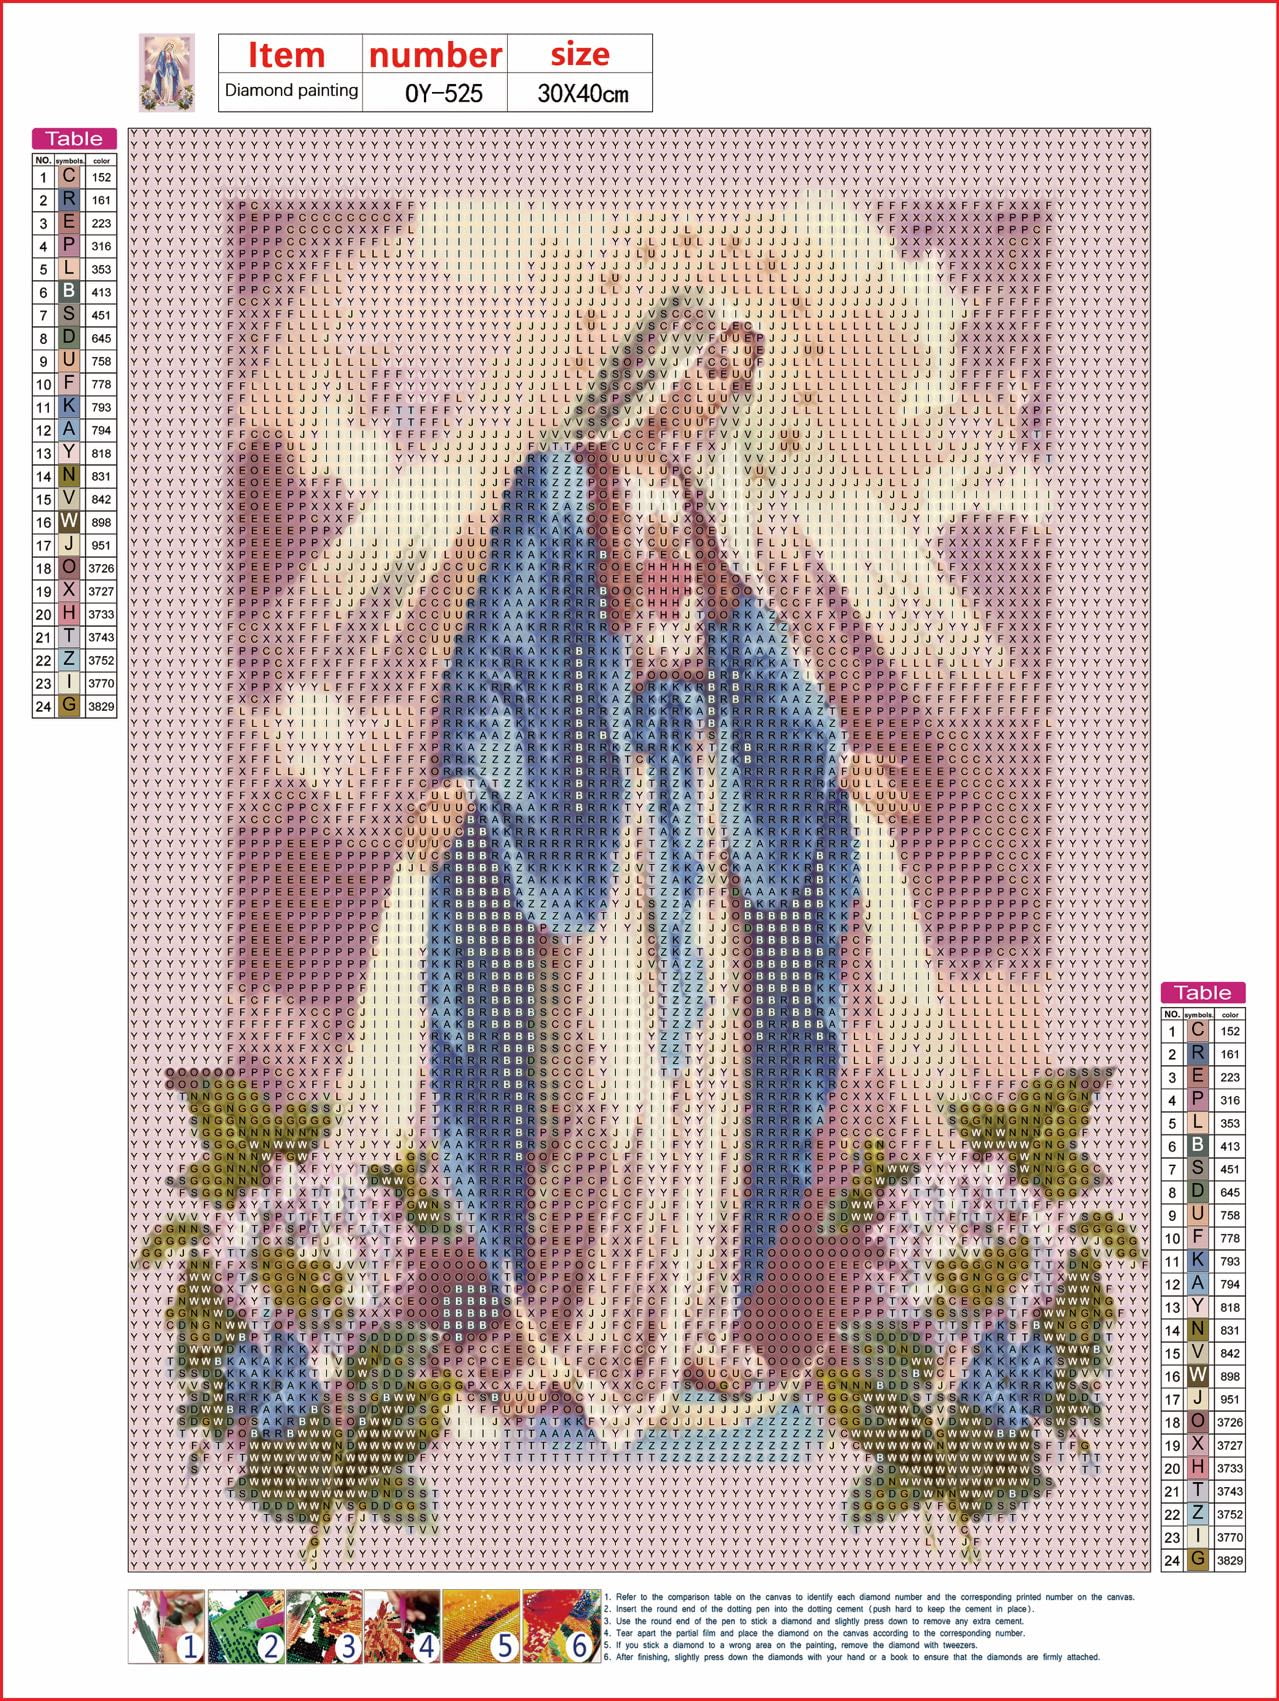 2-Pack Mother Mary Diamond Painting Kits - Madonna Full Drill 5D DIY Diamond Art for Adults Kids Home Wall Decor Gifts, 12x16in, Pattern#19